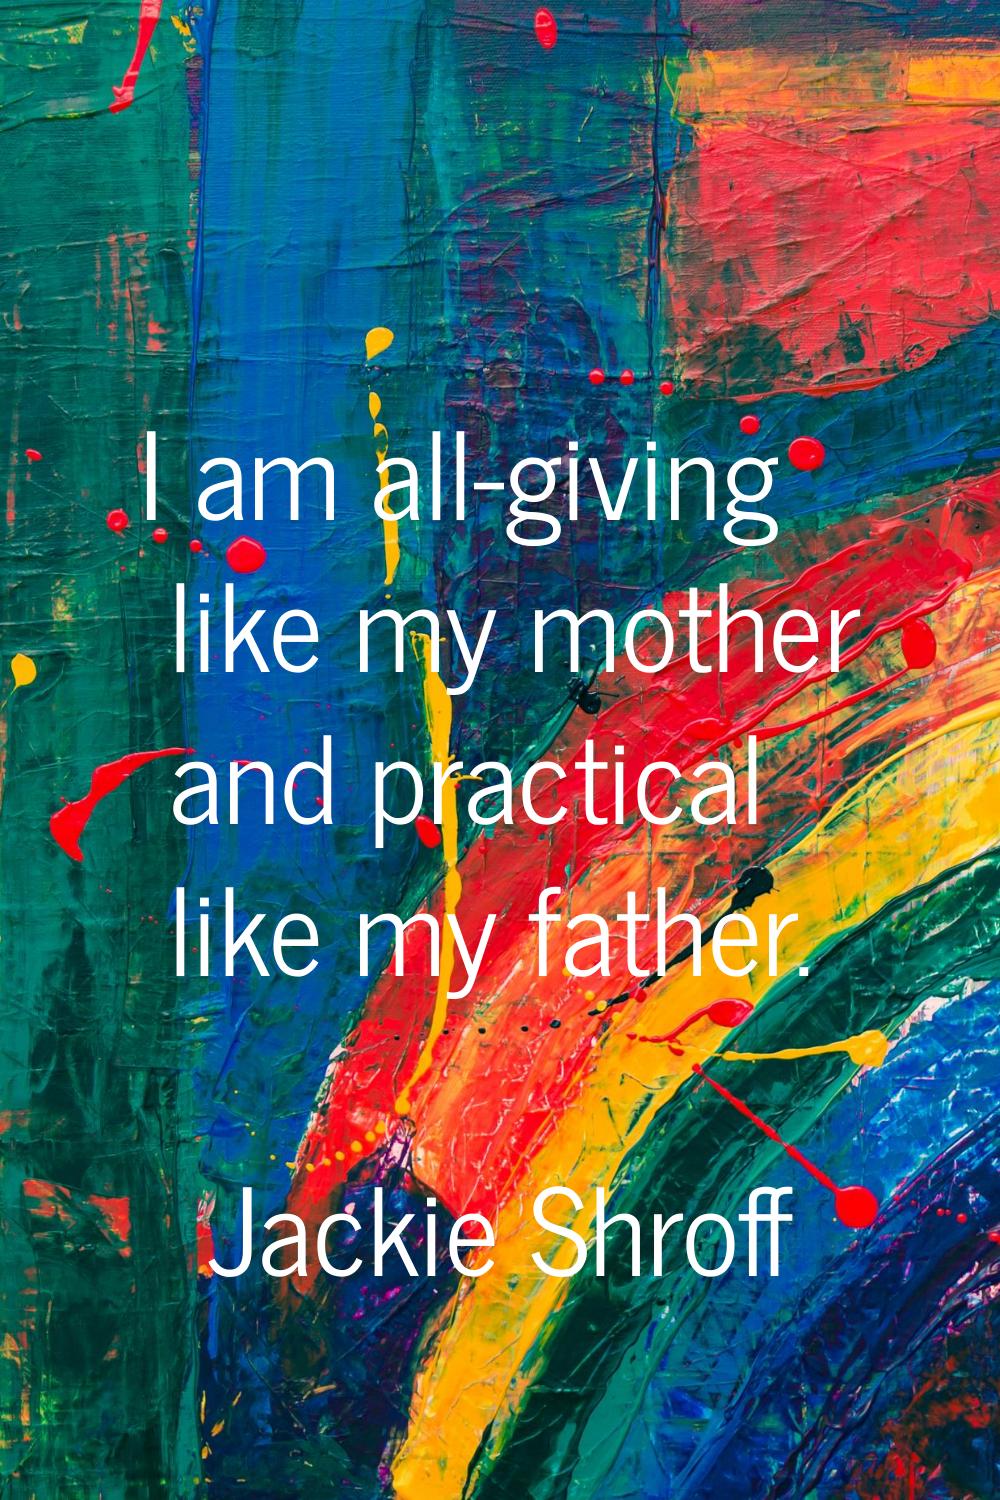 I am all-giving like my mother and practical like my father.